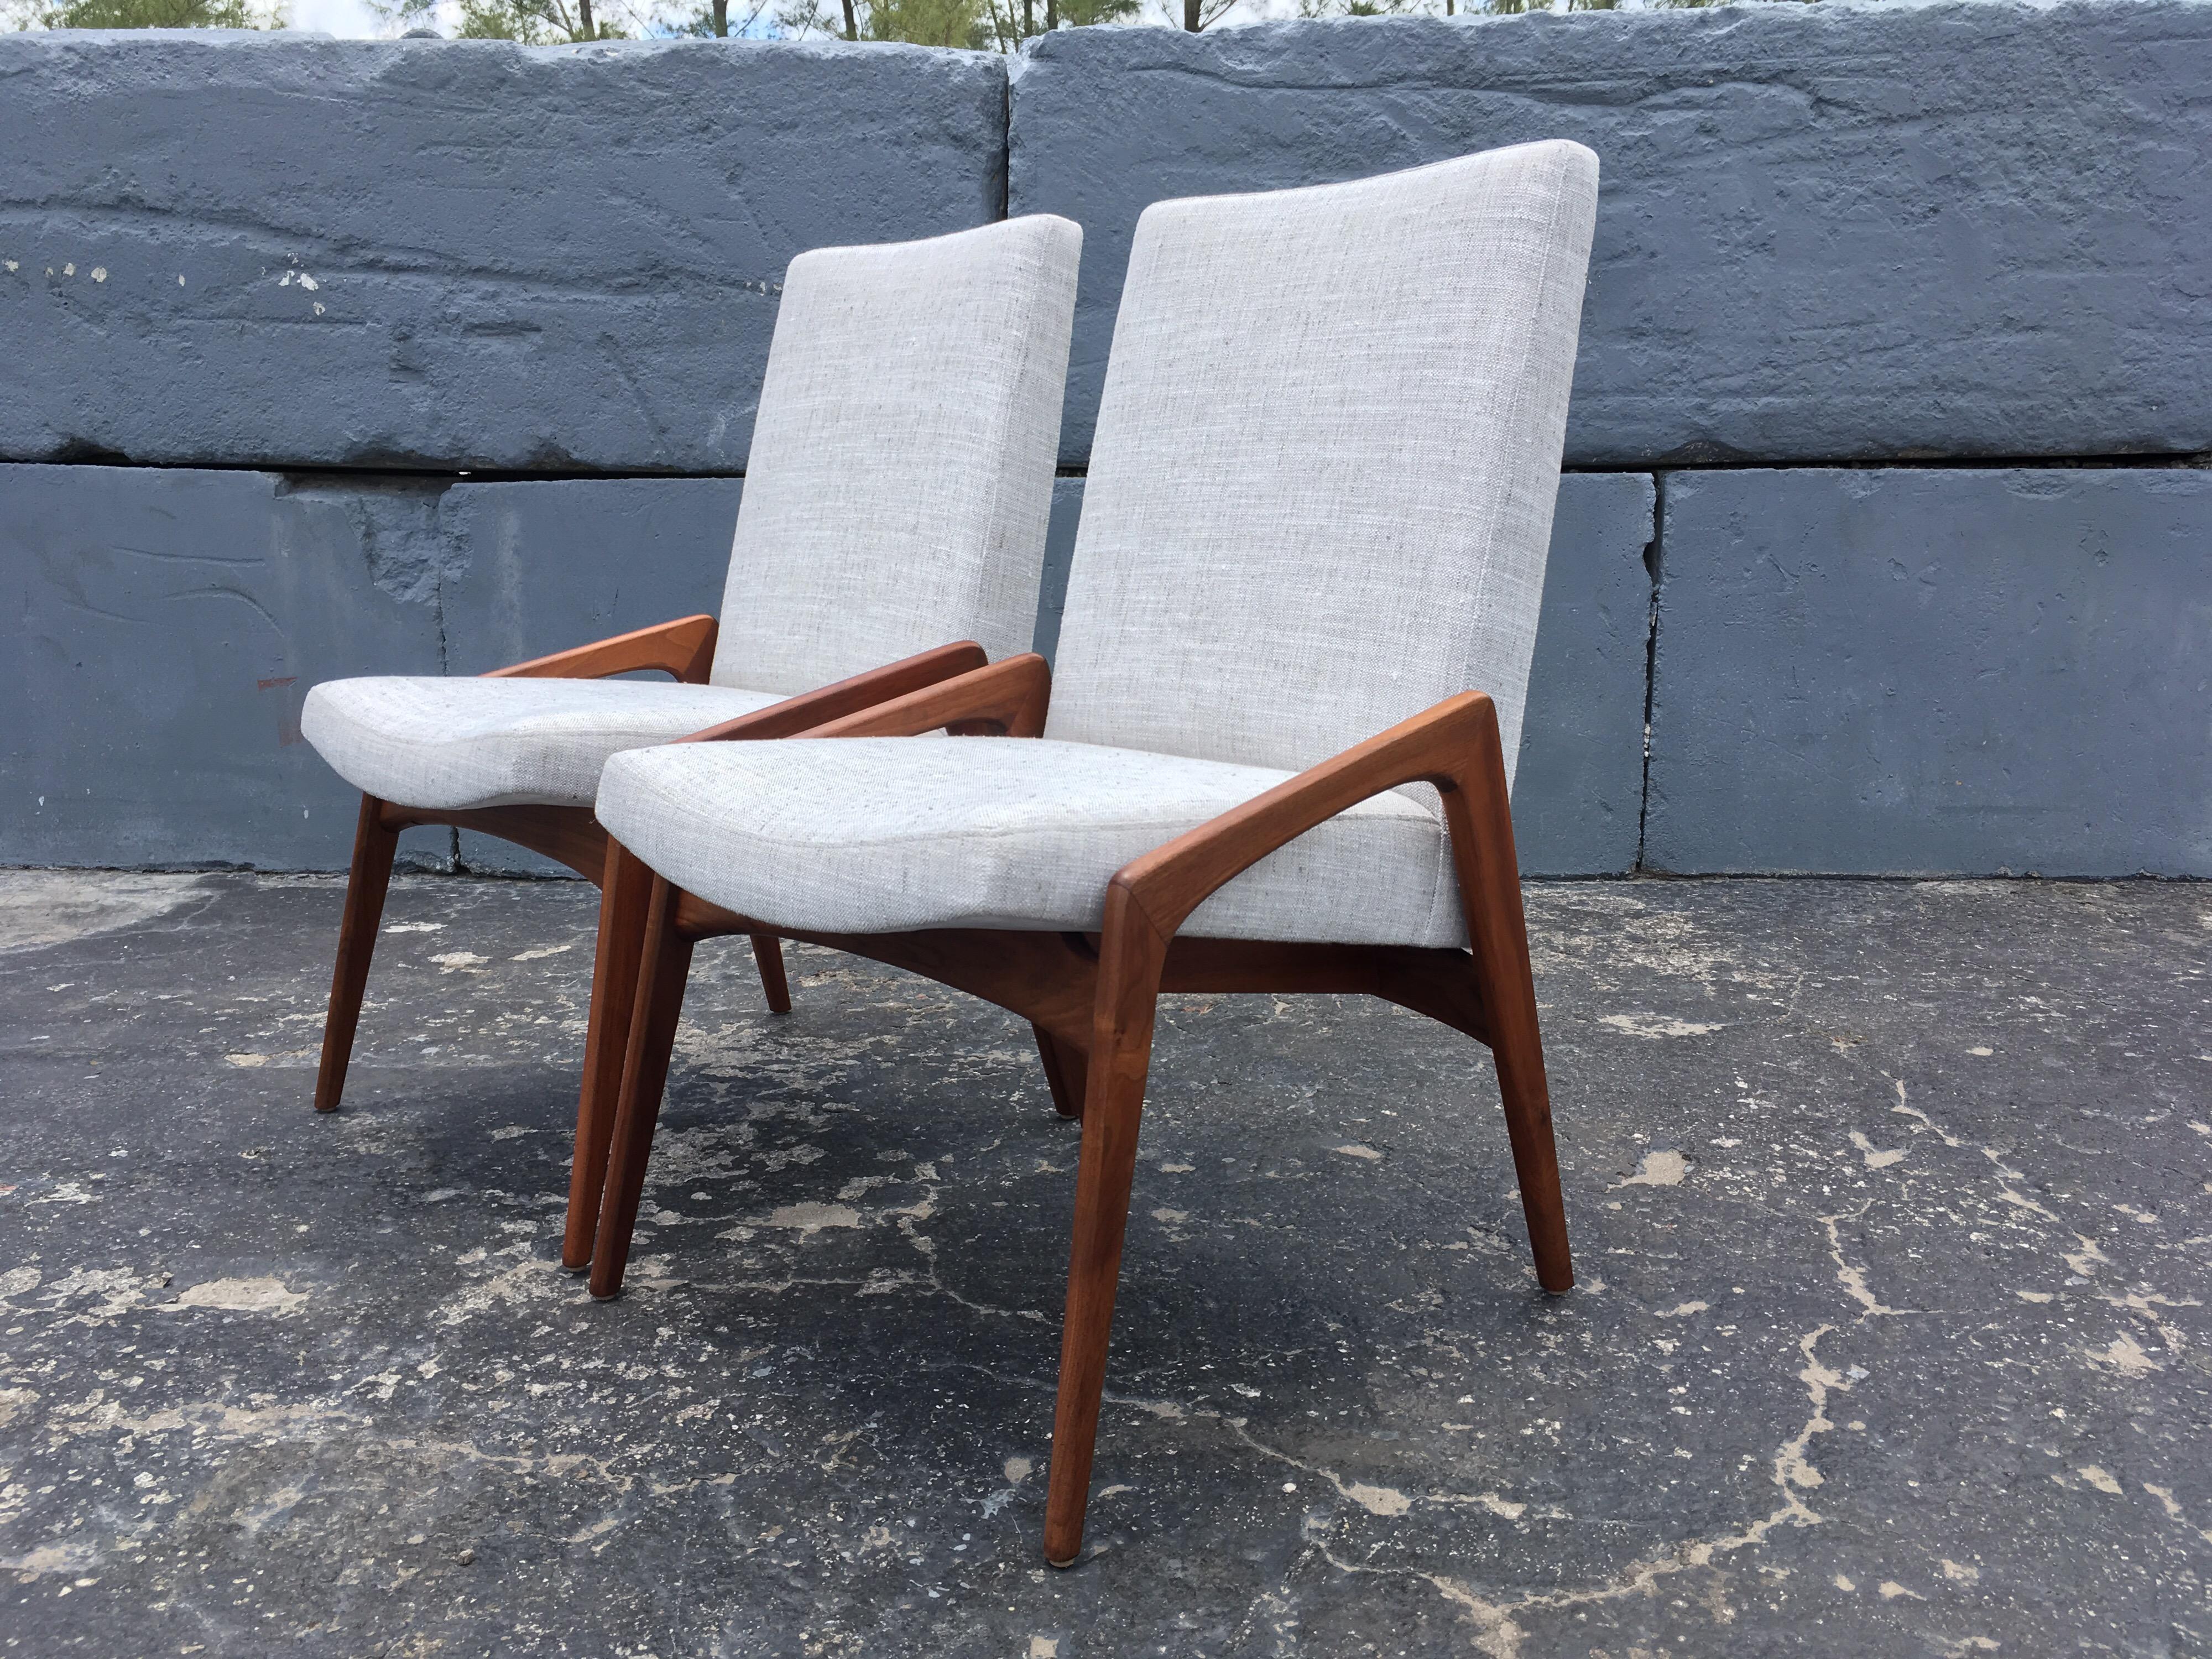 Mid-20th Century Pair of Danish Modern Chairs, Walnut, 1950s, Excellent Condition For Sale